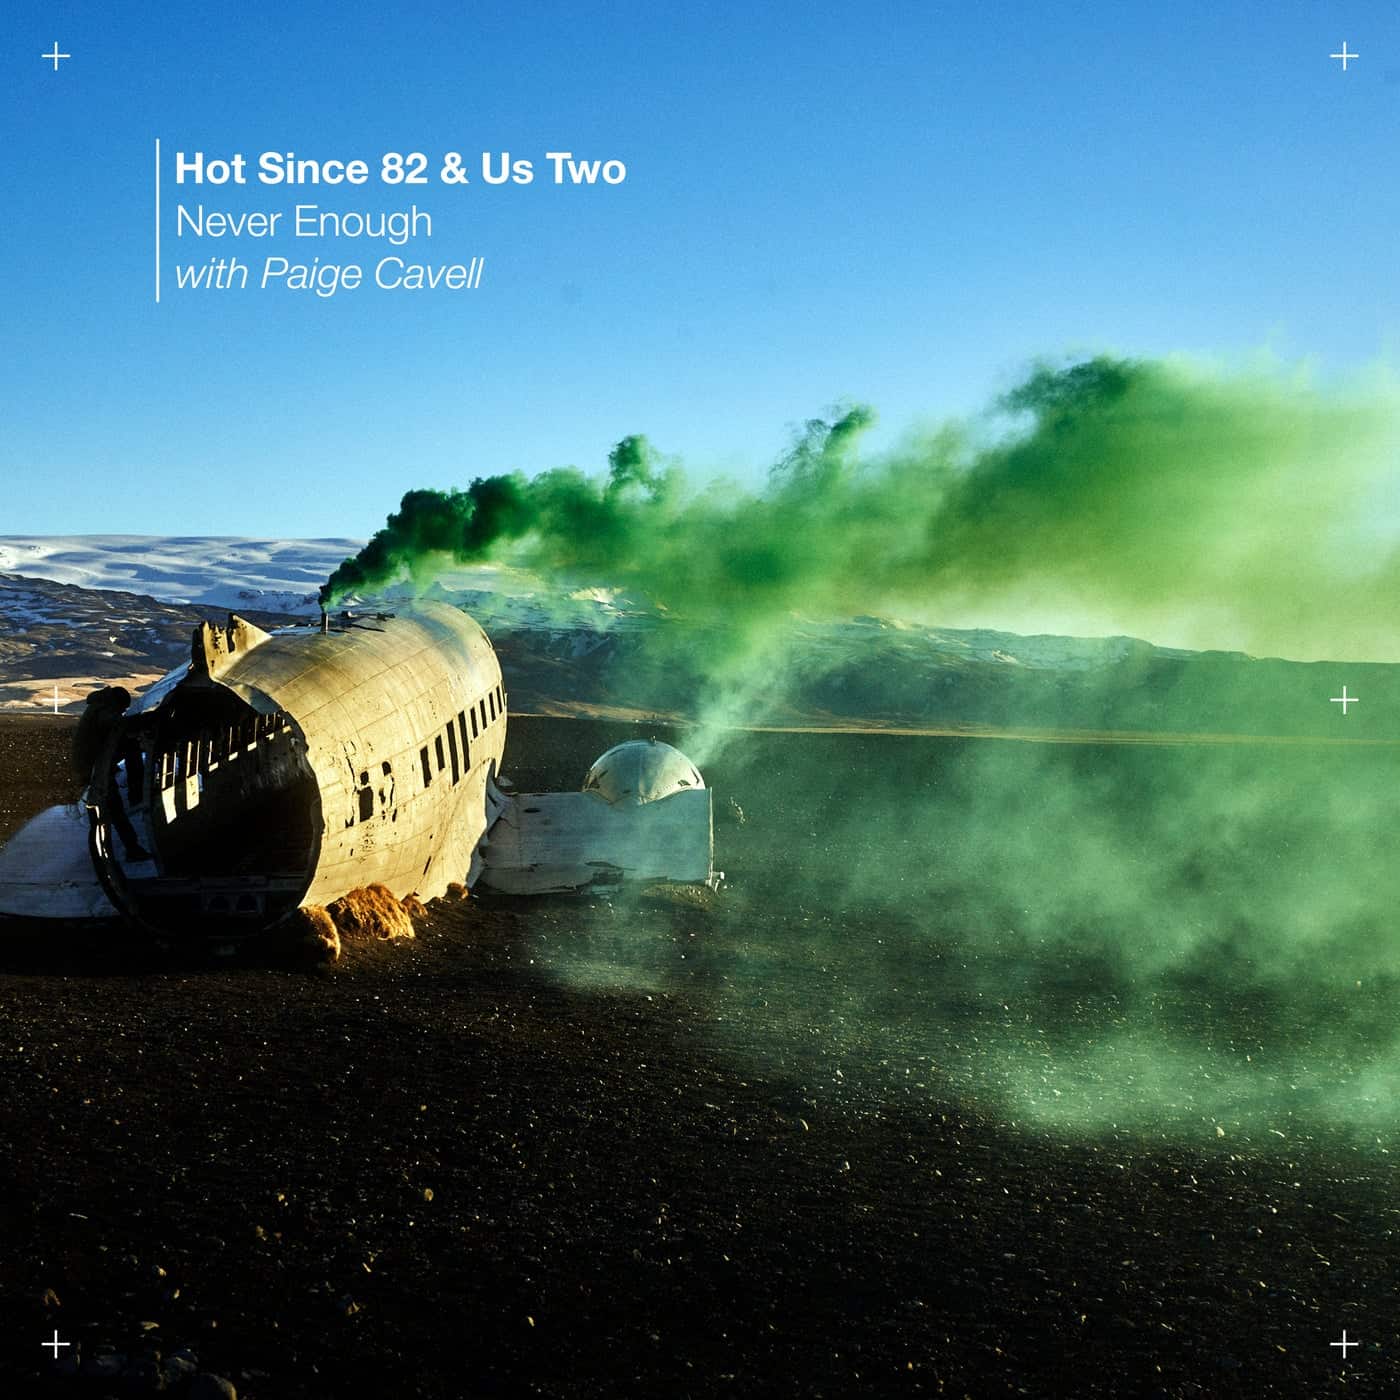 image cover: Hot Since 82, Paige Cavell, Us Two - Never Enough on Knee Deep In Sound